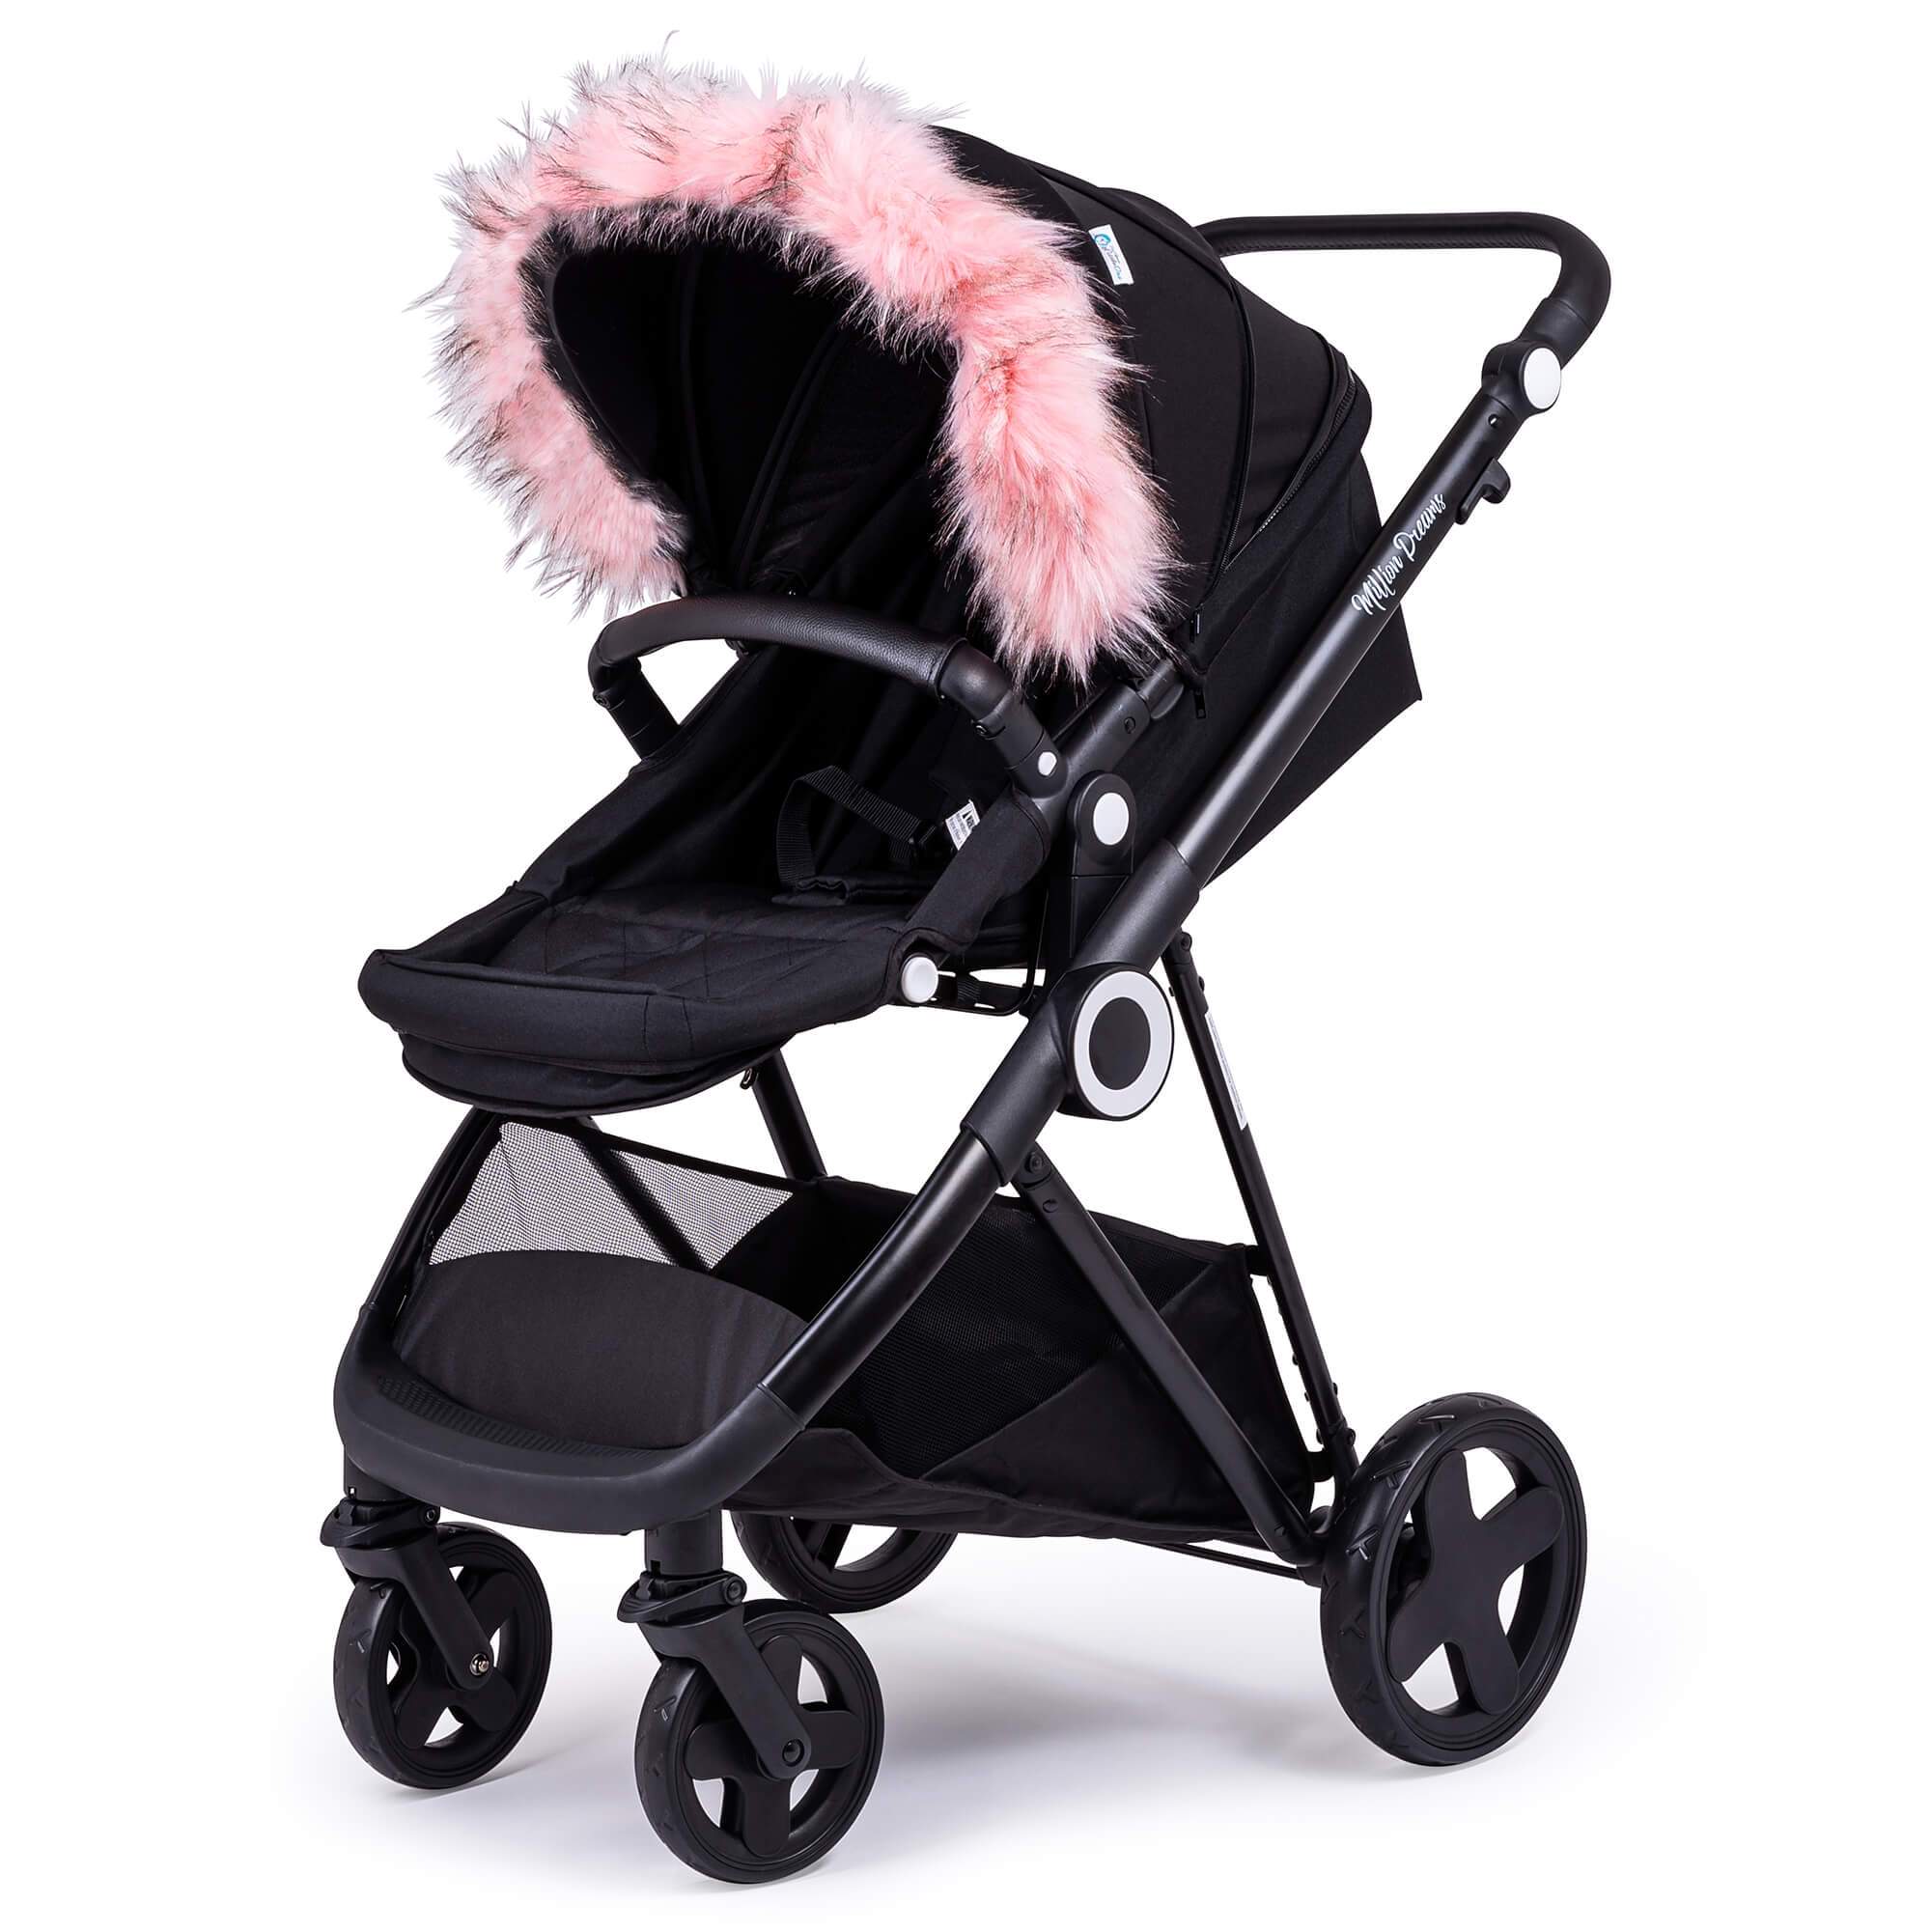 Pram Fur Hood Trim Attachment for Pushchair Compatible with ABC Design - Light Pink / Fits All Models | For Your Little One